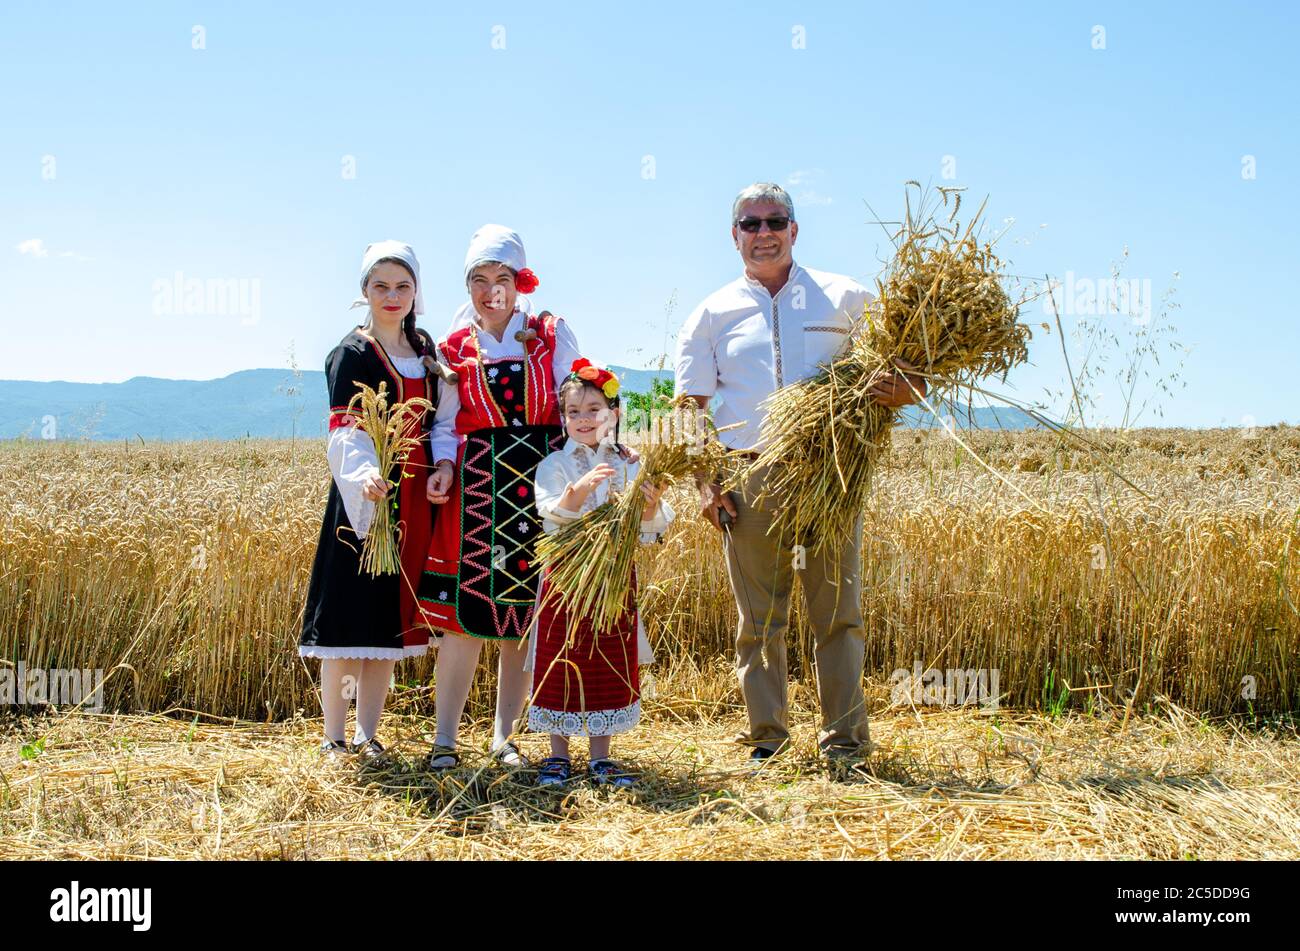 Bulgarians in traditional costume celebrate local custom of wheat harvest in countryside village. Stock Photo